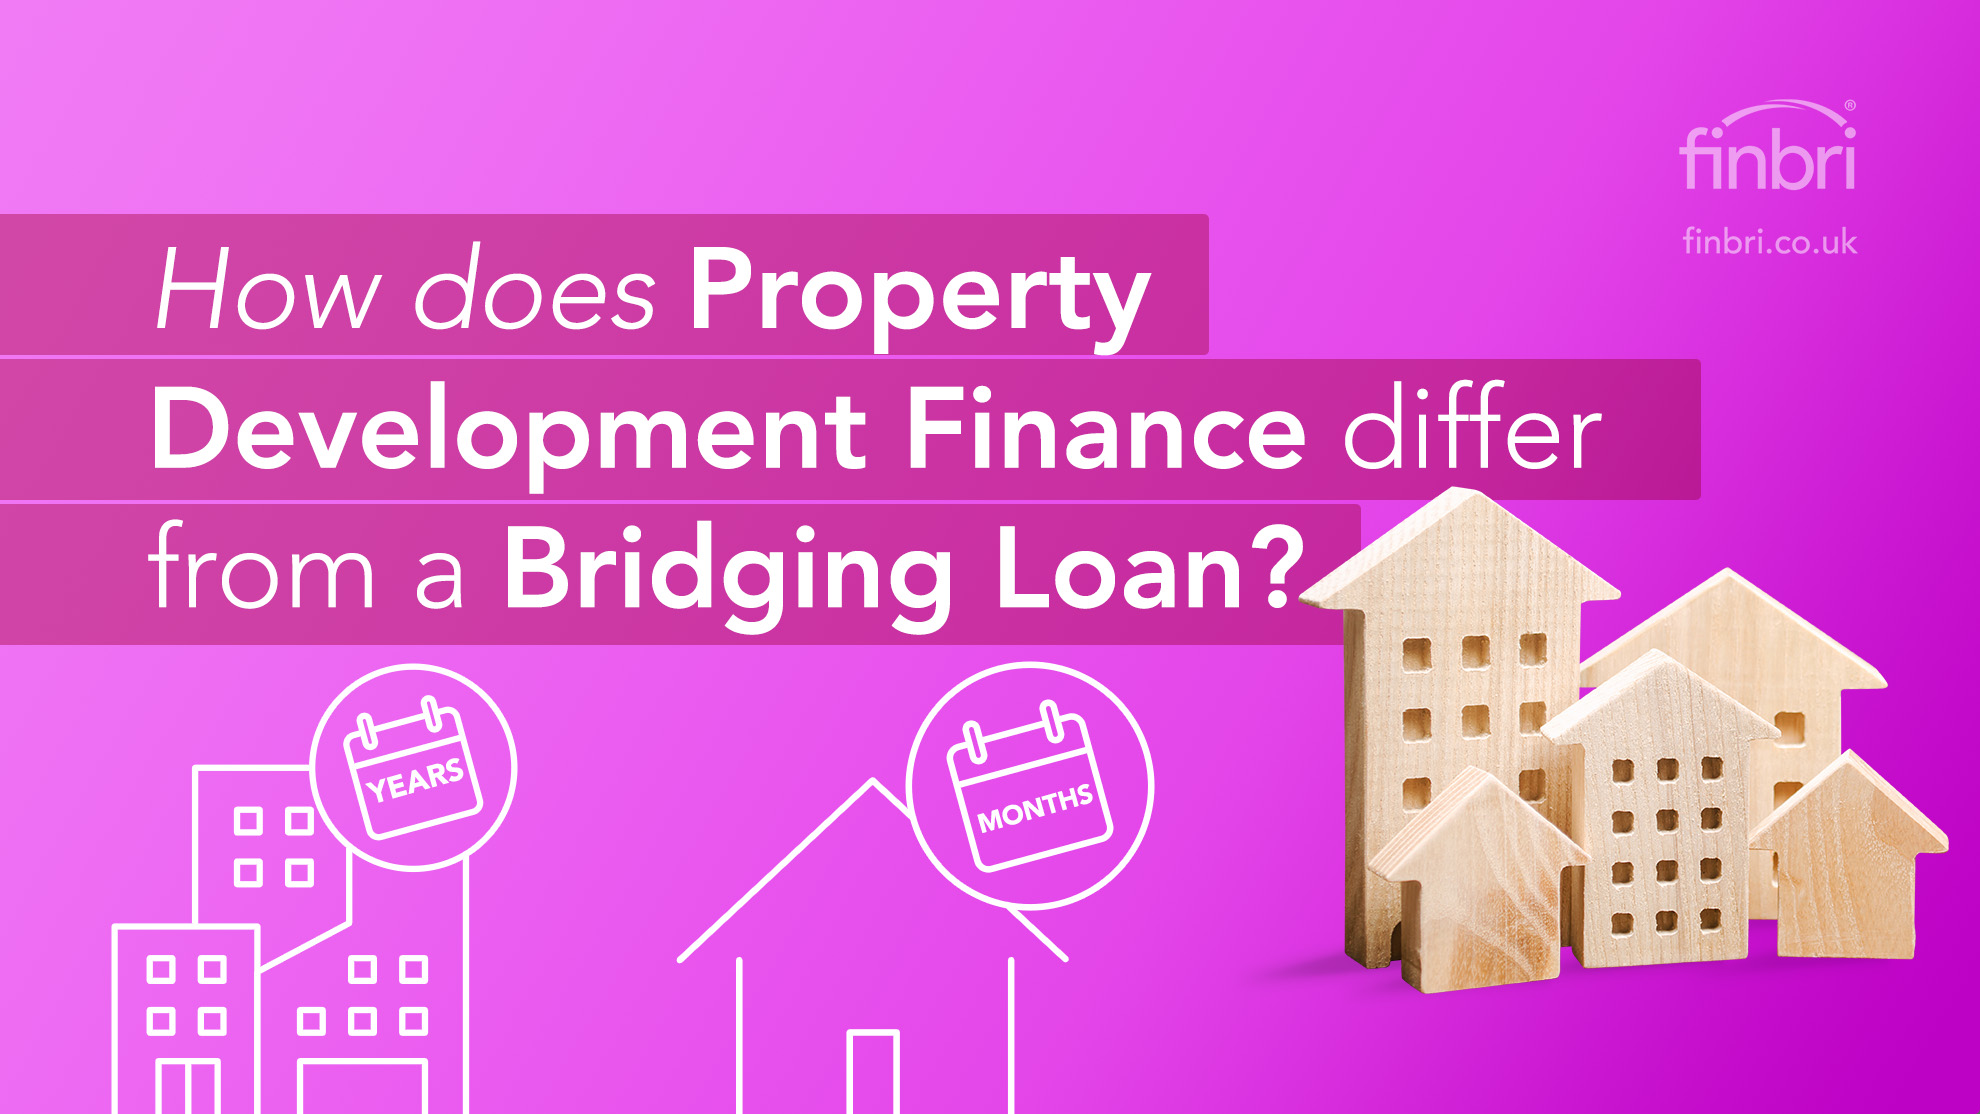 How does Property Development Finance differ from a Bridging Loan?